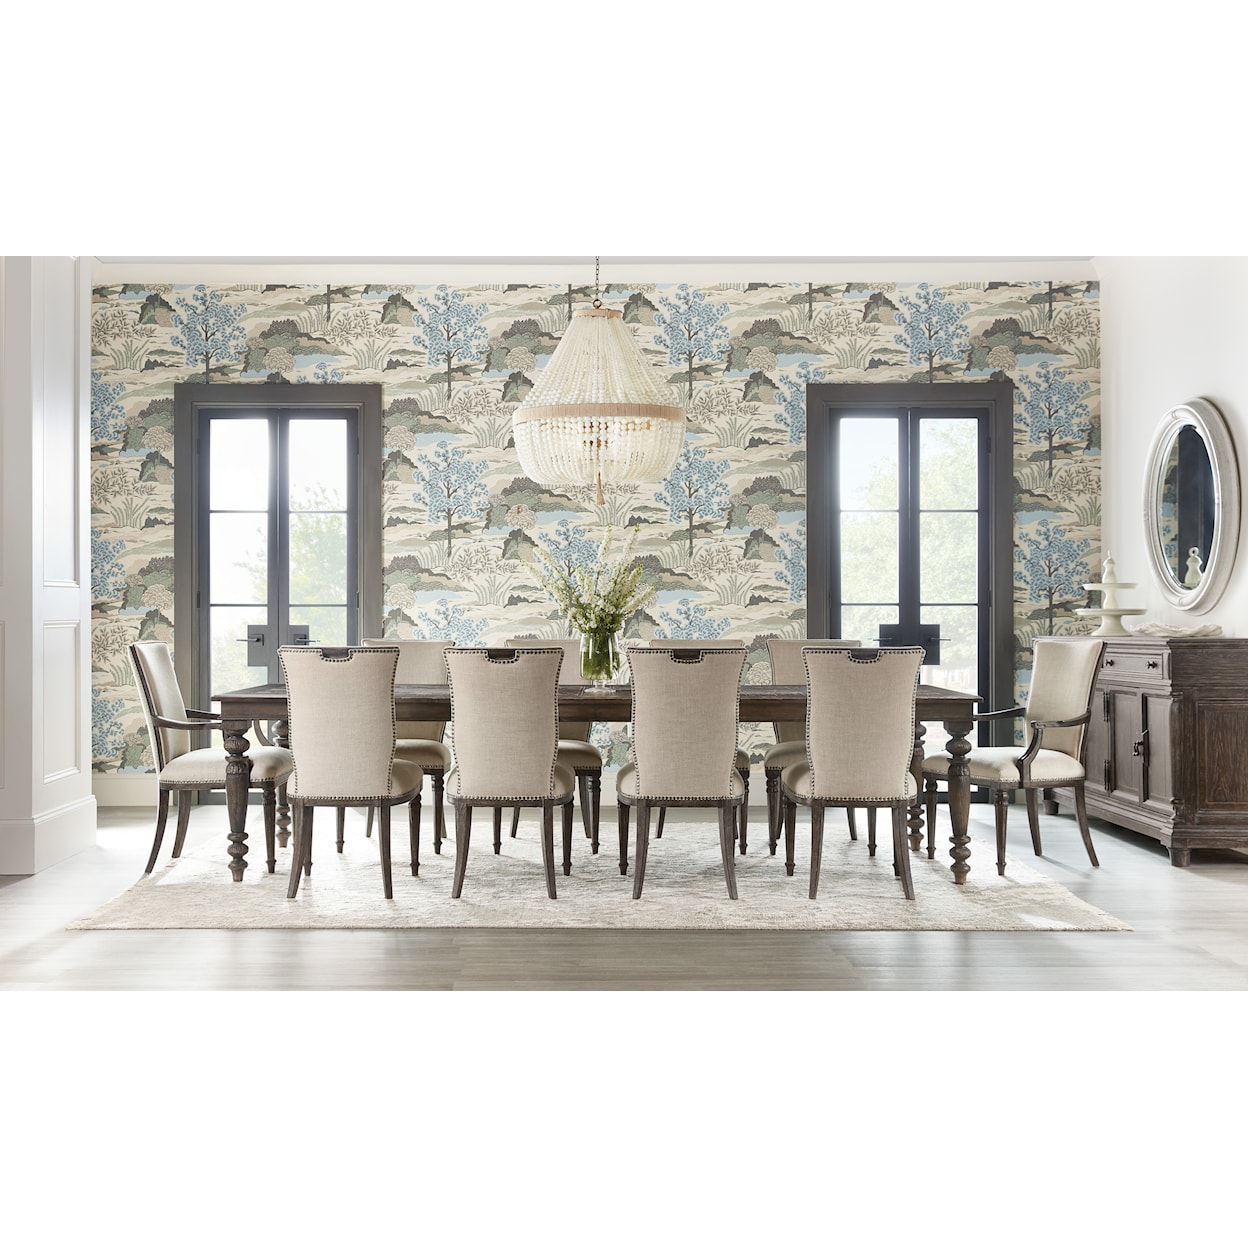 Hooker Furniture Traditions 11-Piece Dining Set with Upholstered Chairs